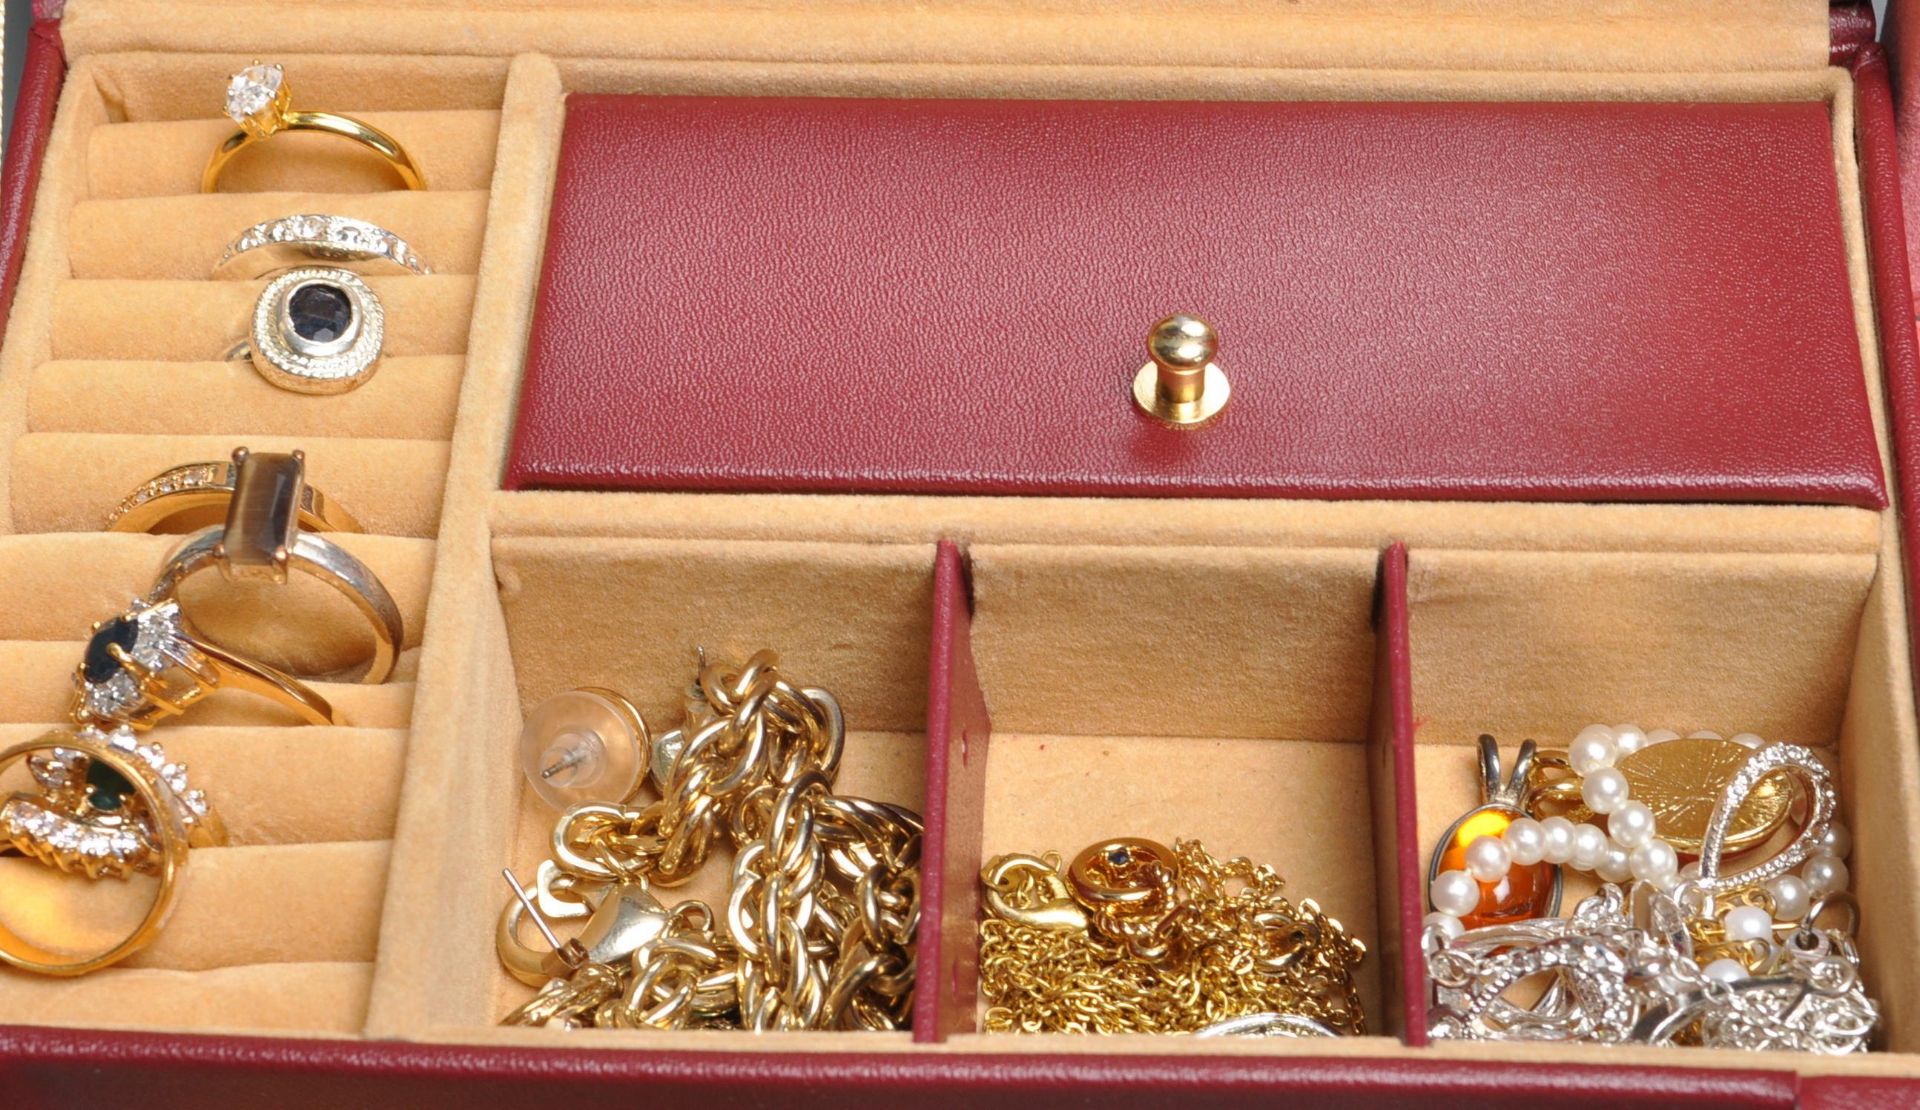 COLLECTION OF VINTAGE 20TH CENTURY COSTUME JEWELLERY IN THREE VINTAGE JEWELLERY BOXES - Image 8 of 9